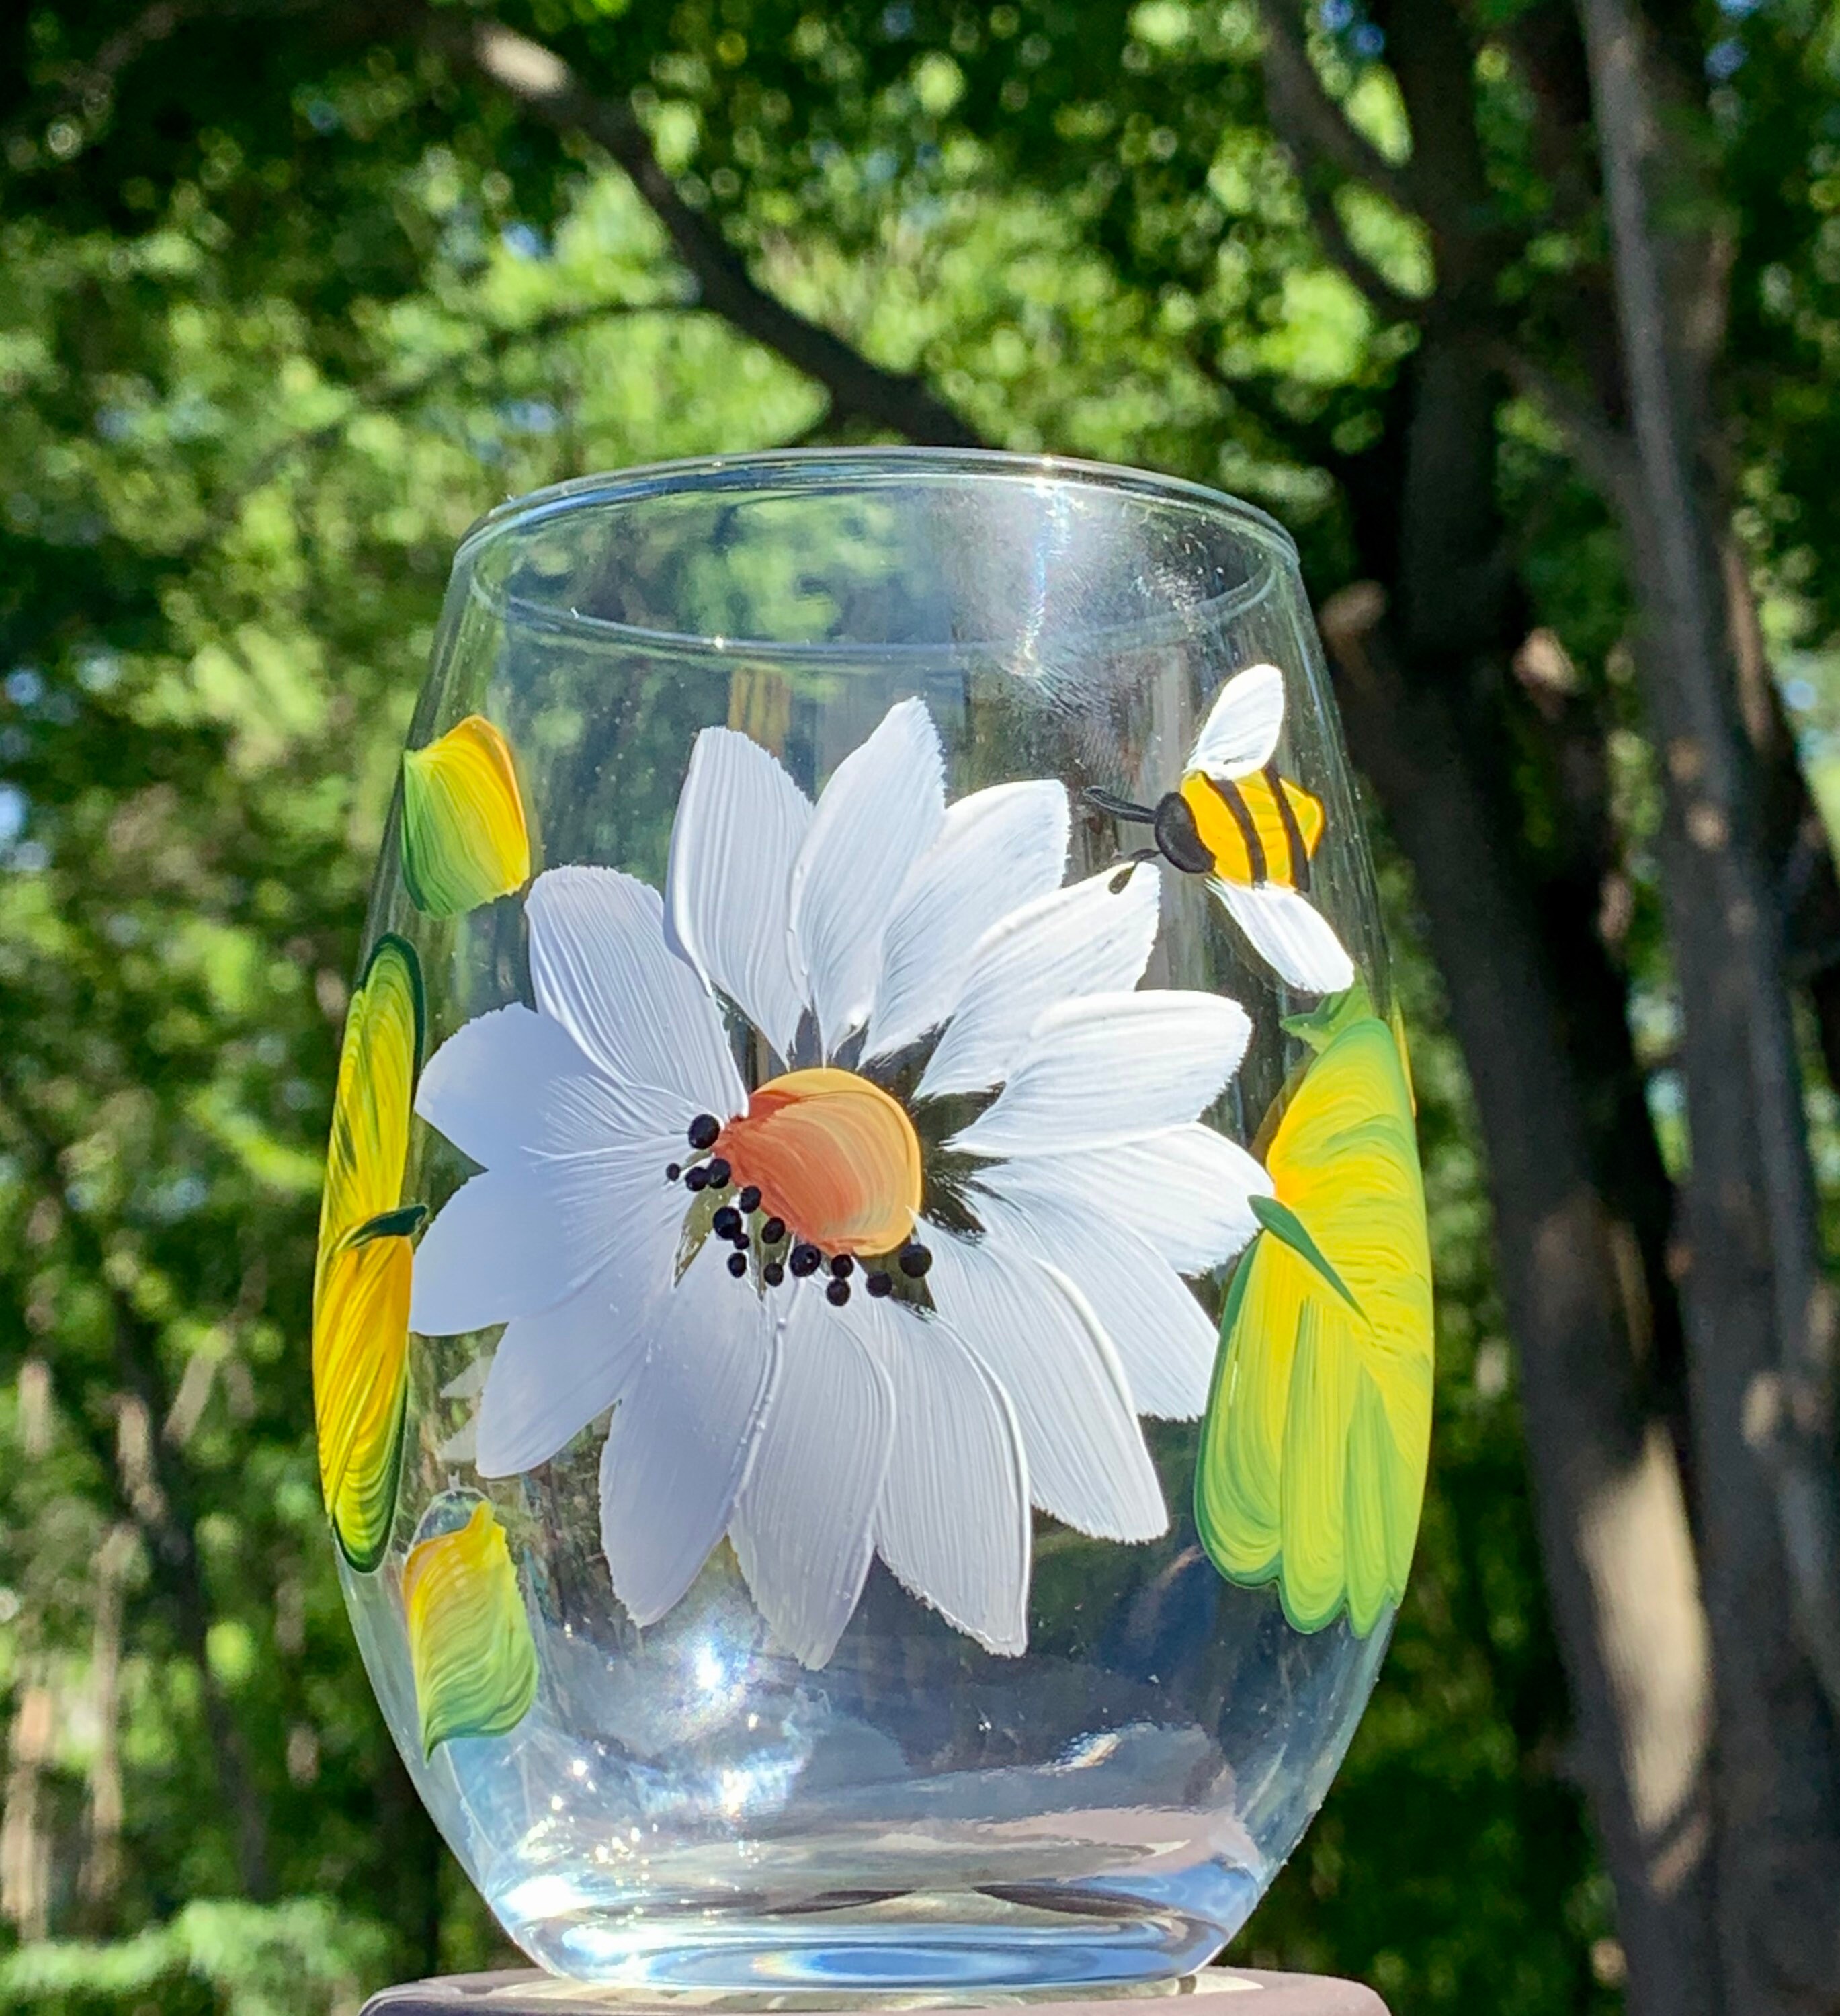 Hand Painted Wine Glasses Spring Flowers, Pretty Floral Wine Glass,  Bridesmaid Wine Glass, Wine Glass Wedding Favor, Mothers Day Wine Glass 